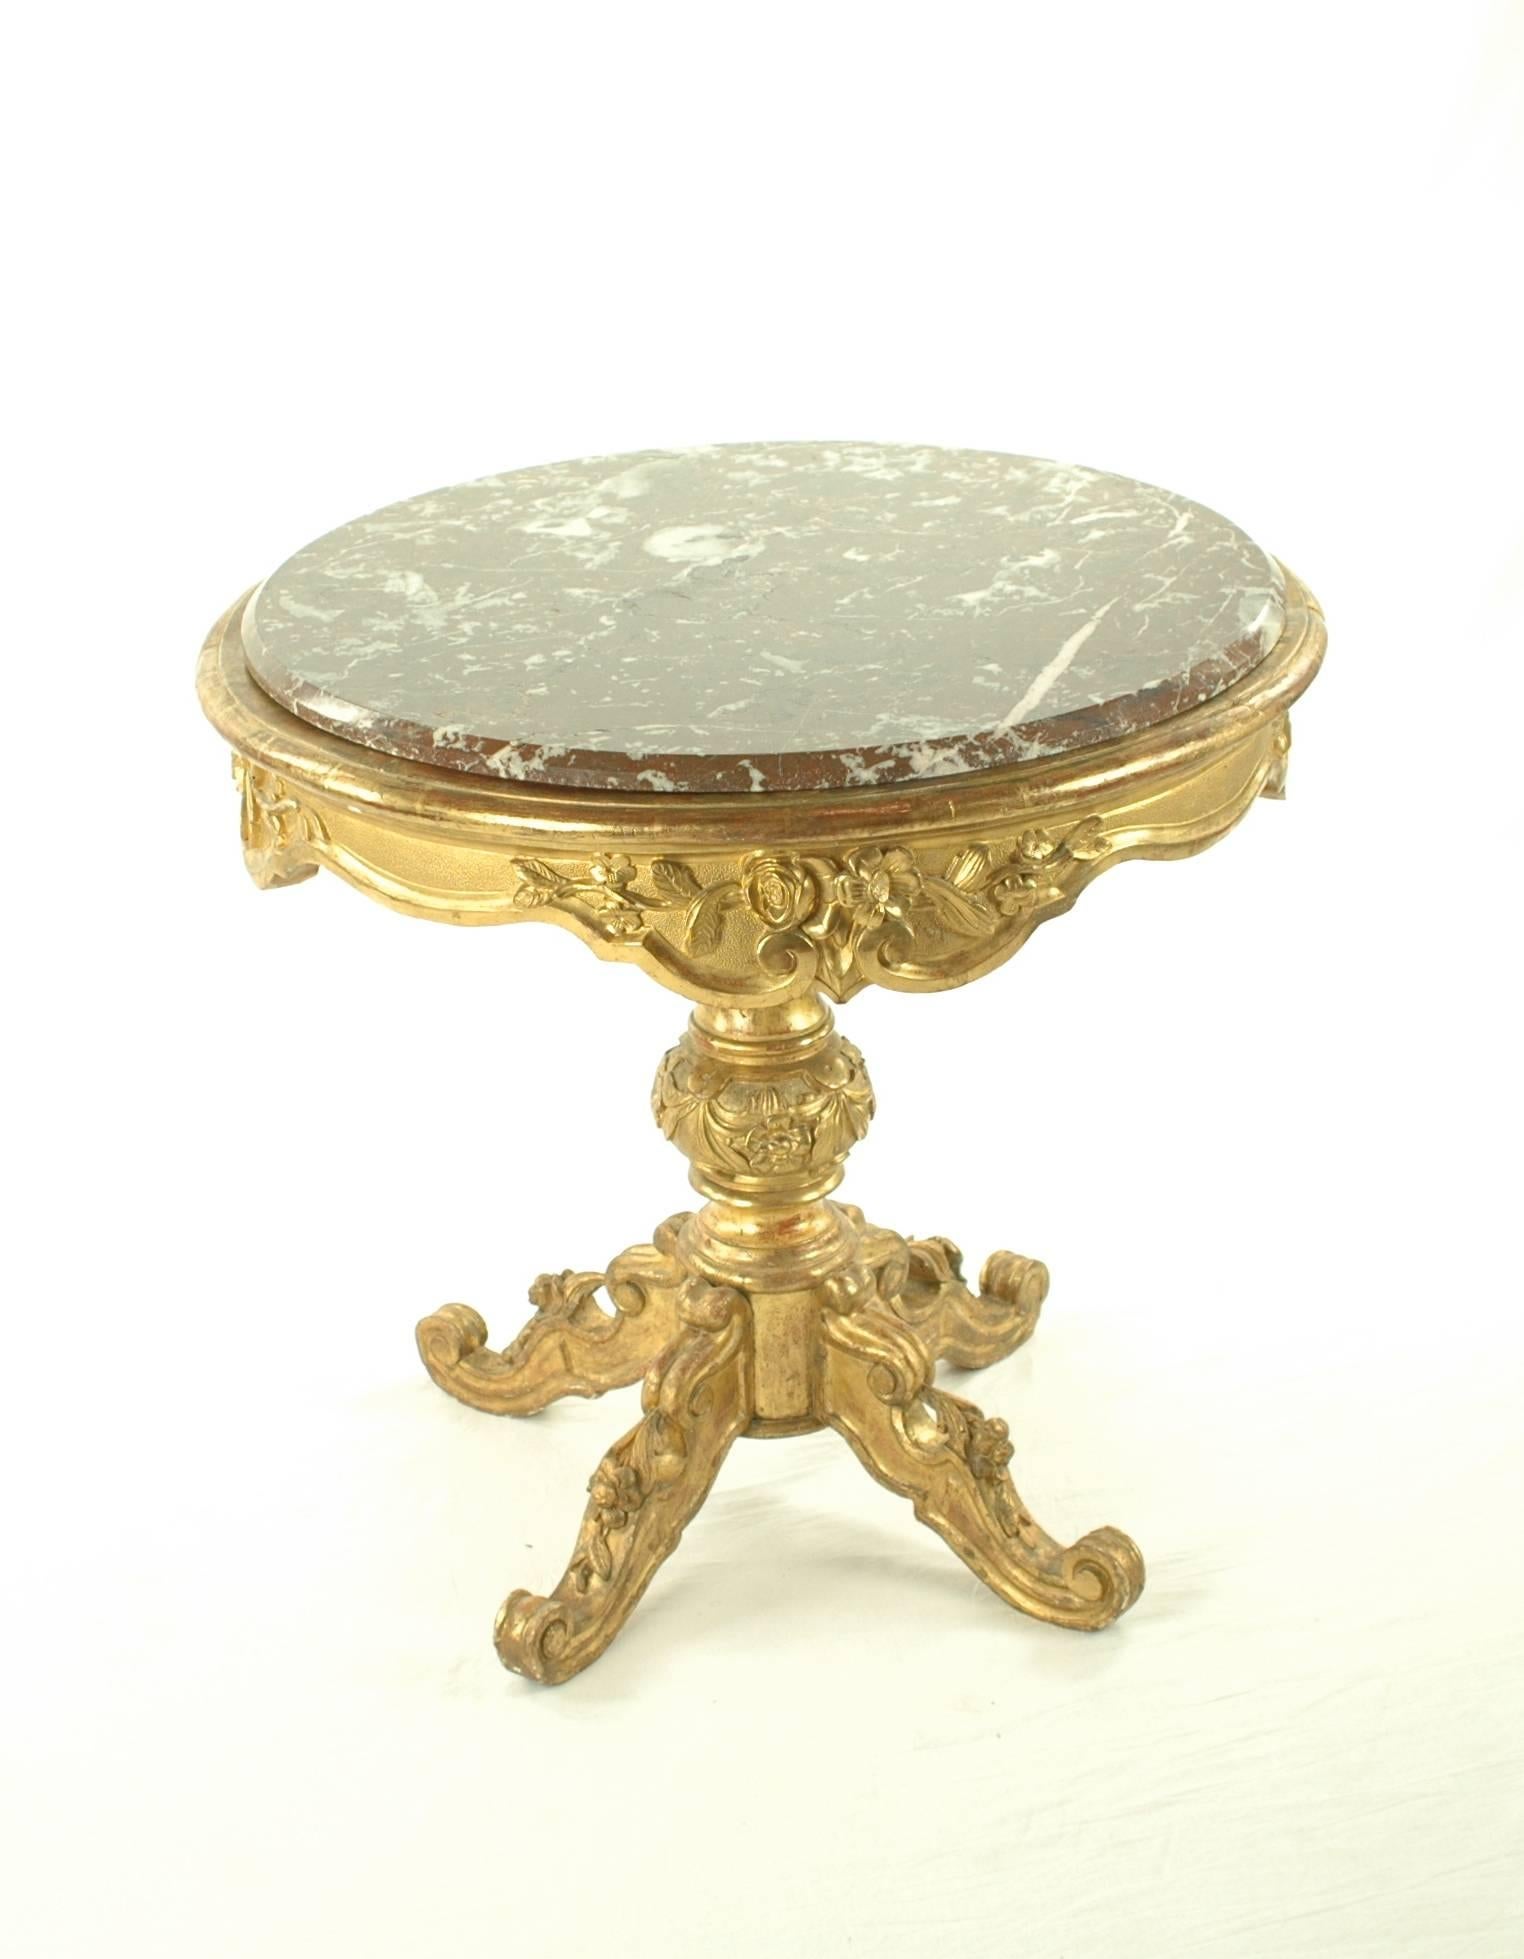 First half of the 19th century
Rococo style
Marble top
Wood, golden-colored
Measures: Height 70.5 cm, diameters 74 cm

Delivery can be made to your door within 7 days worldwide. We already delivered to Asia, US and a lot of European countries.